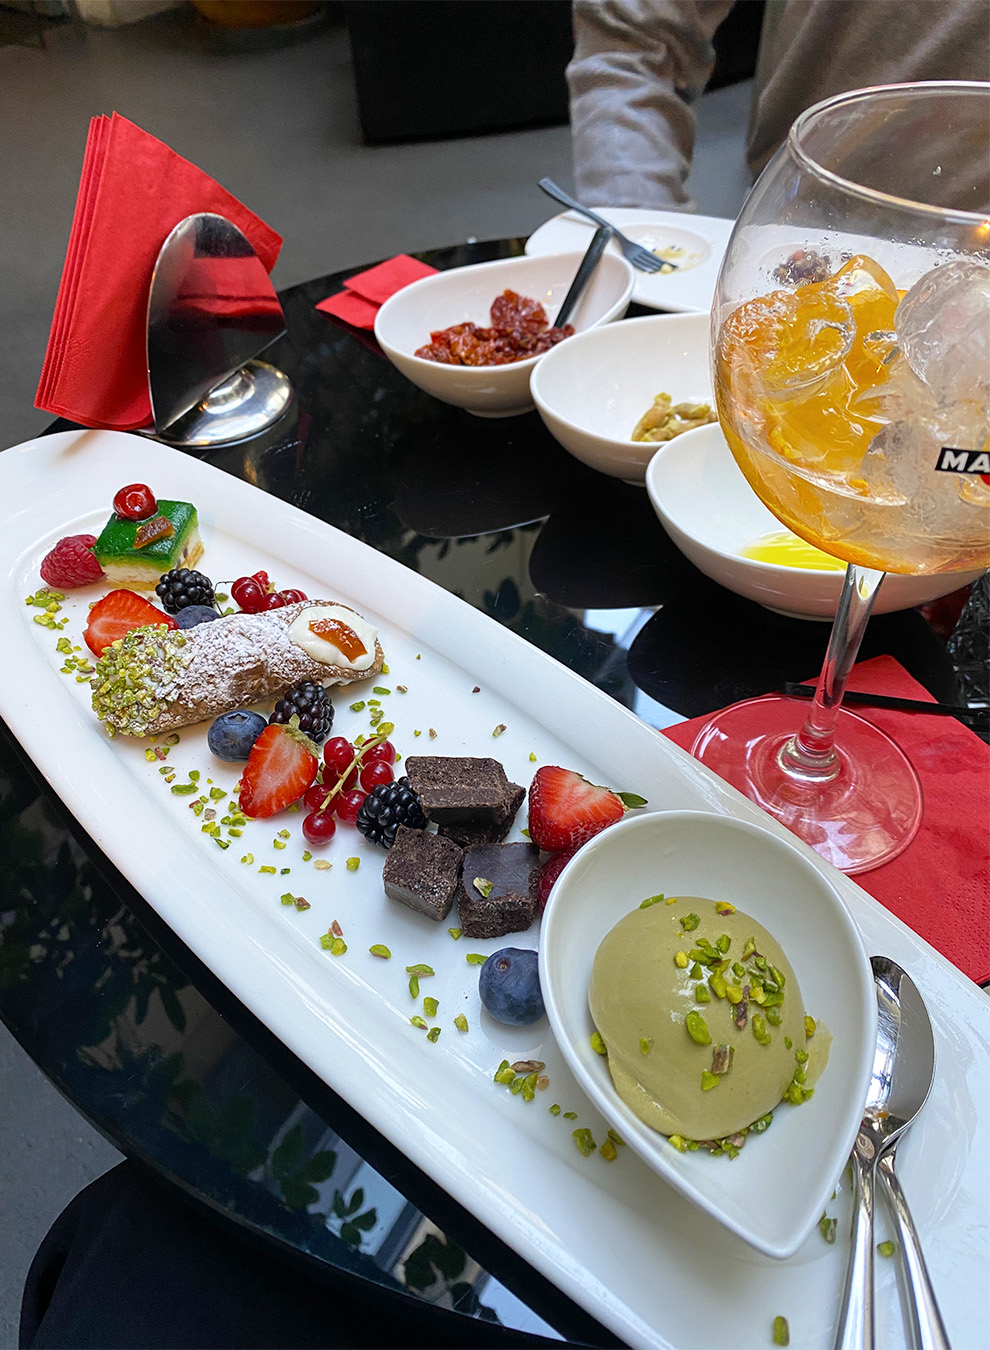 Aperitivo time in Italy: plate with Sicilian dessert